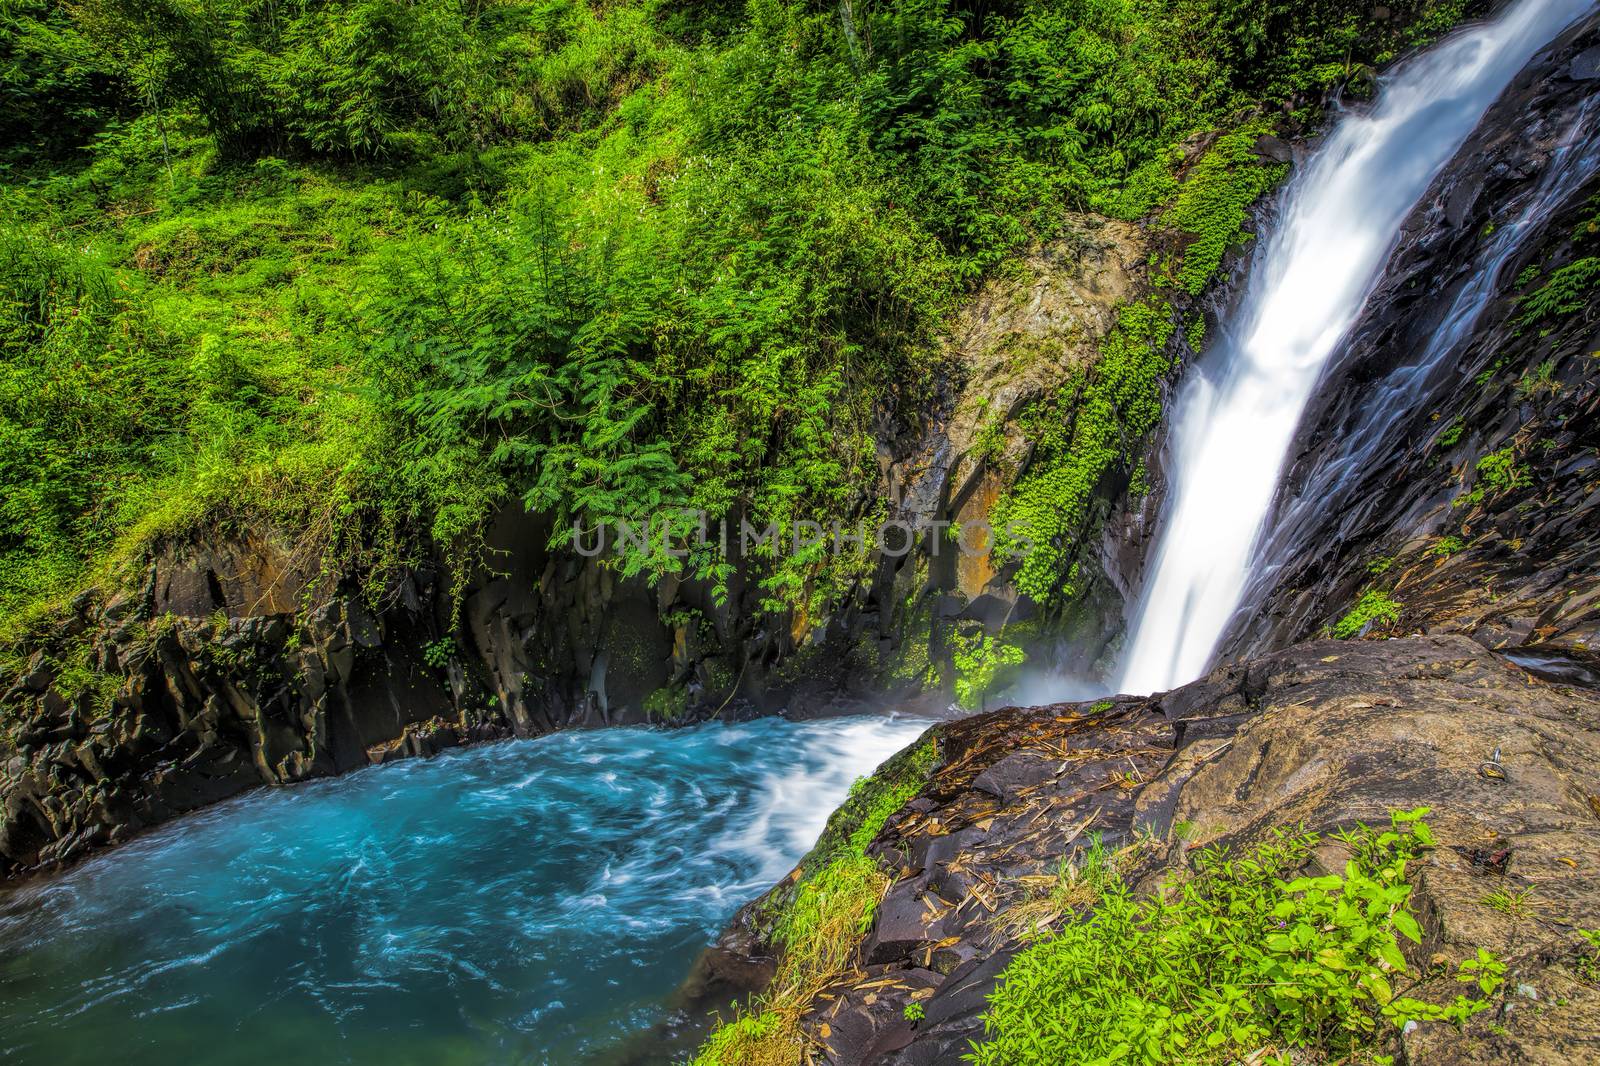 One of the Gitgit waterfalls in Northern Bali, Indonesia